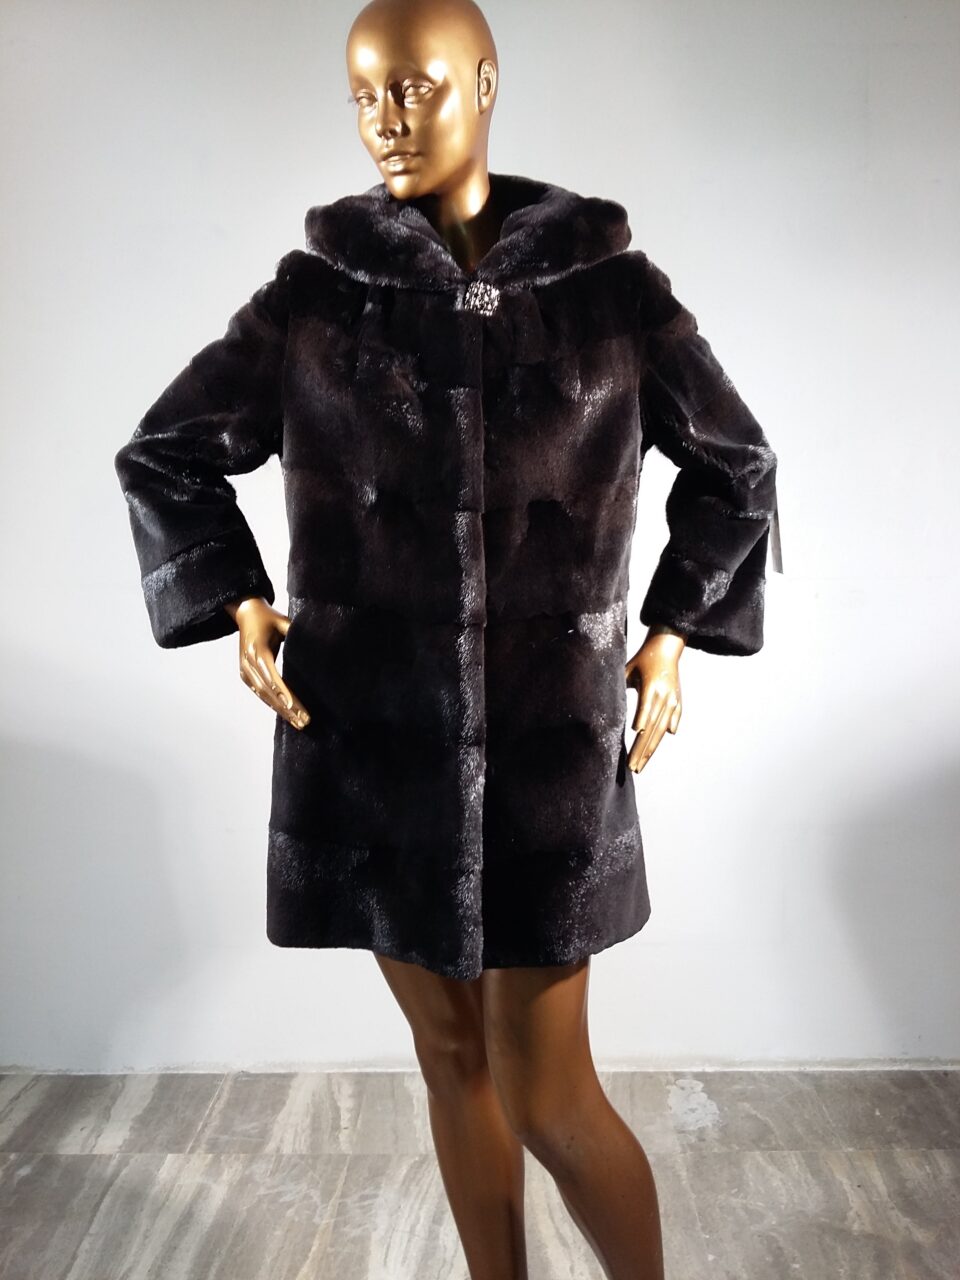 Real Fur Sheared Black Mink Fur Jacket with Hood and style Horizontal